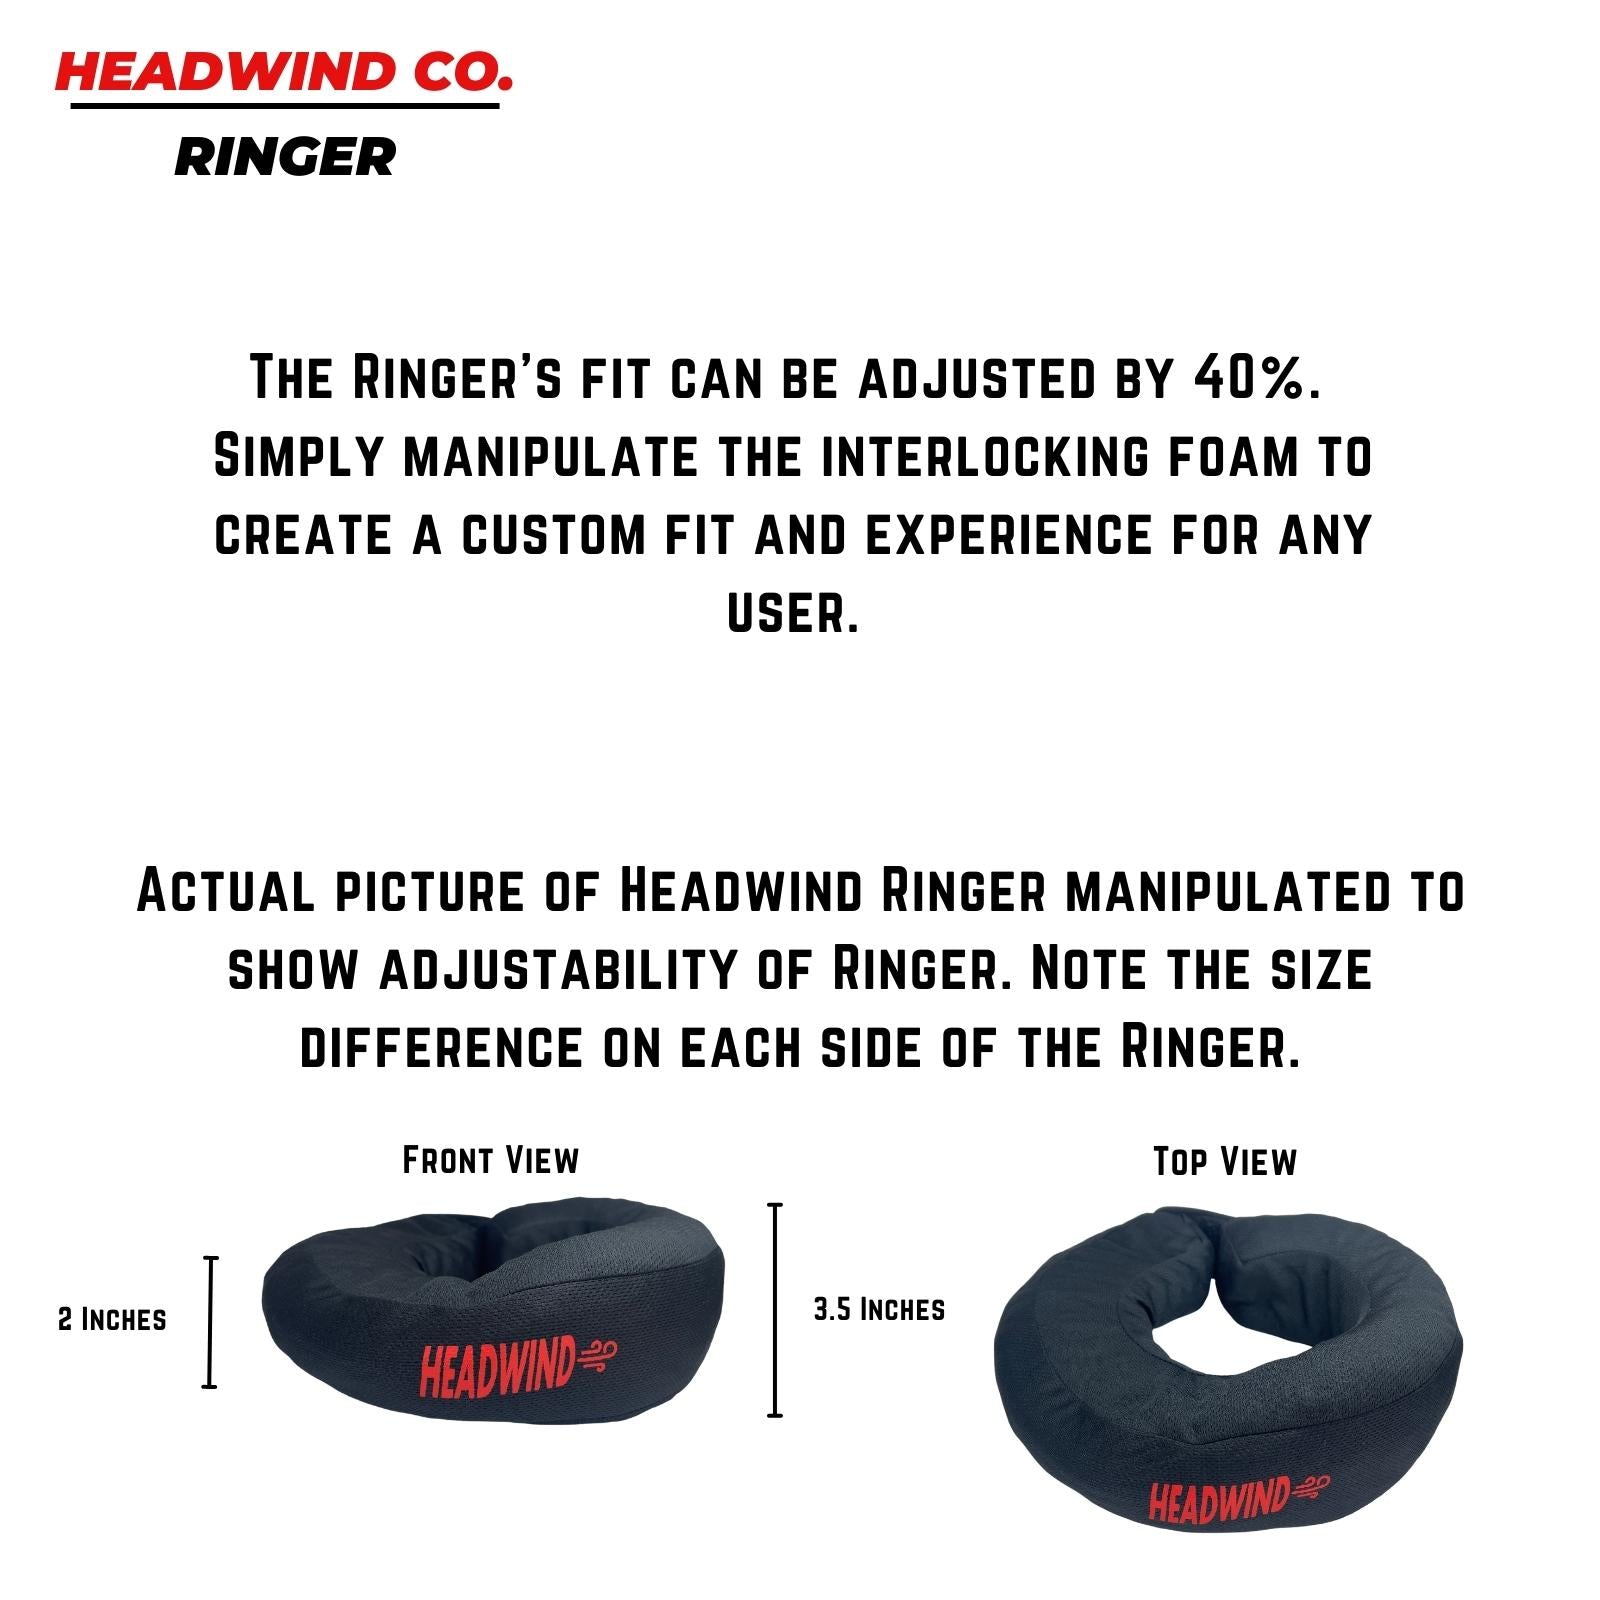 Headwind Ringer can be adjusted by up to 40% by moving interlocking foam pieces for your ideal experience